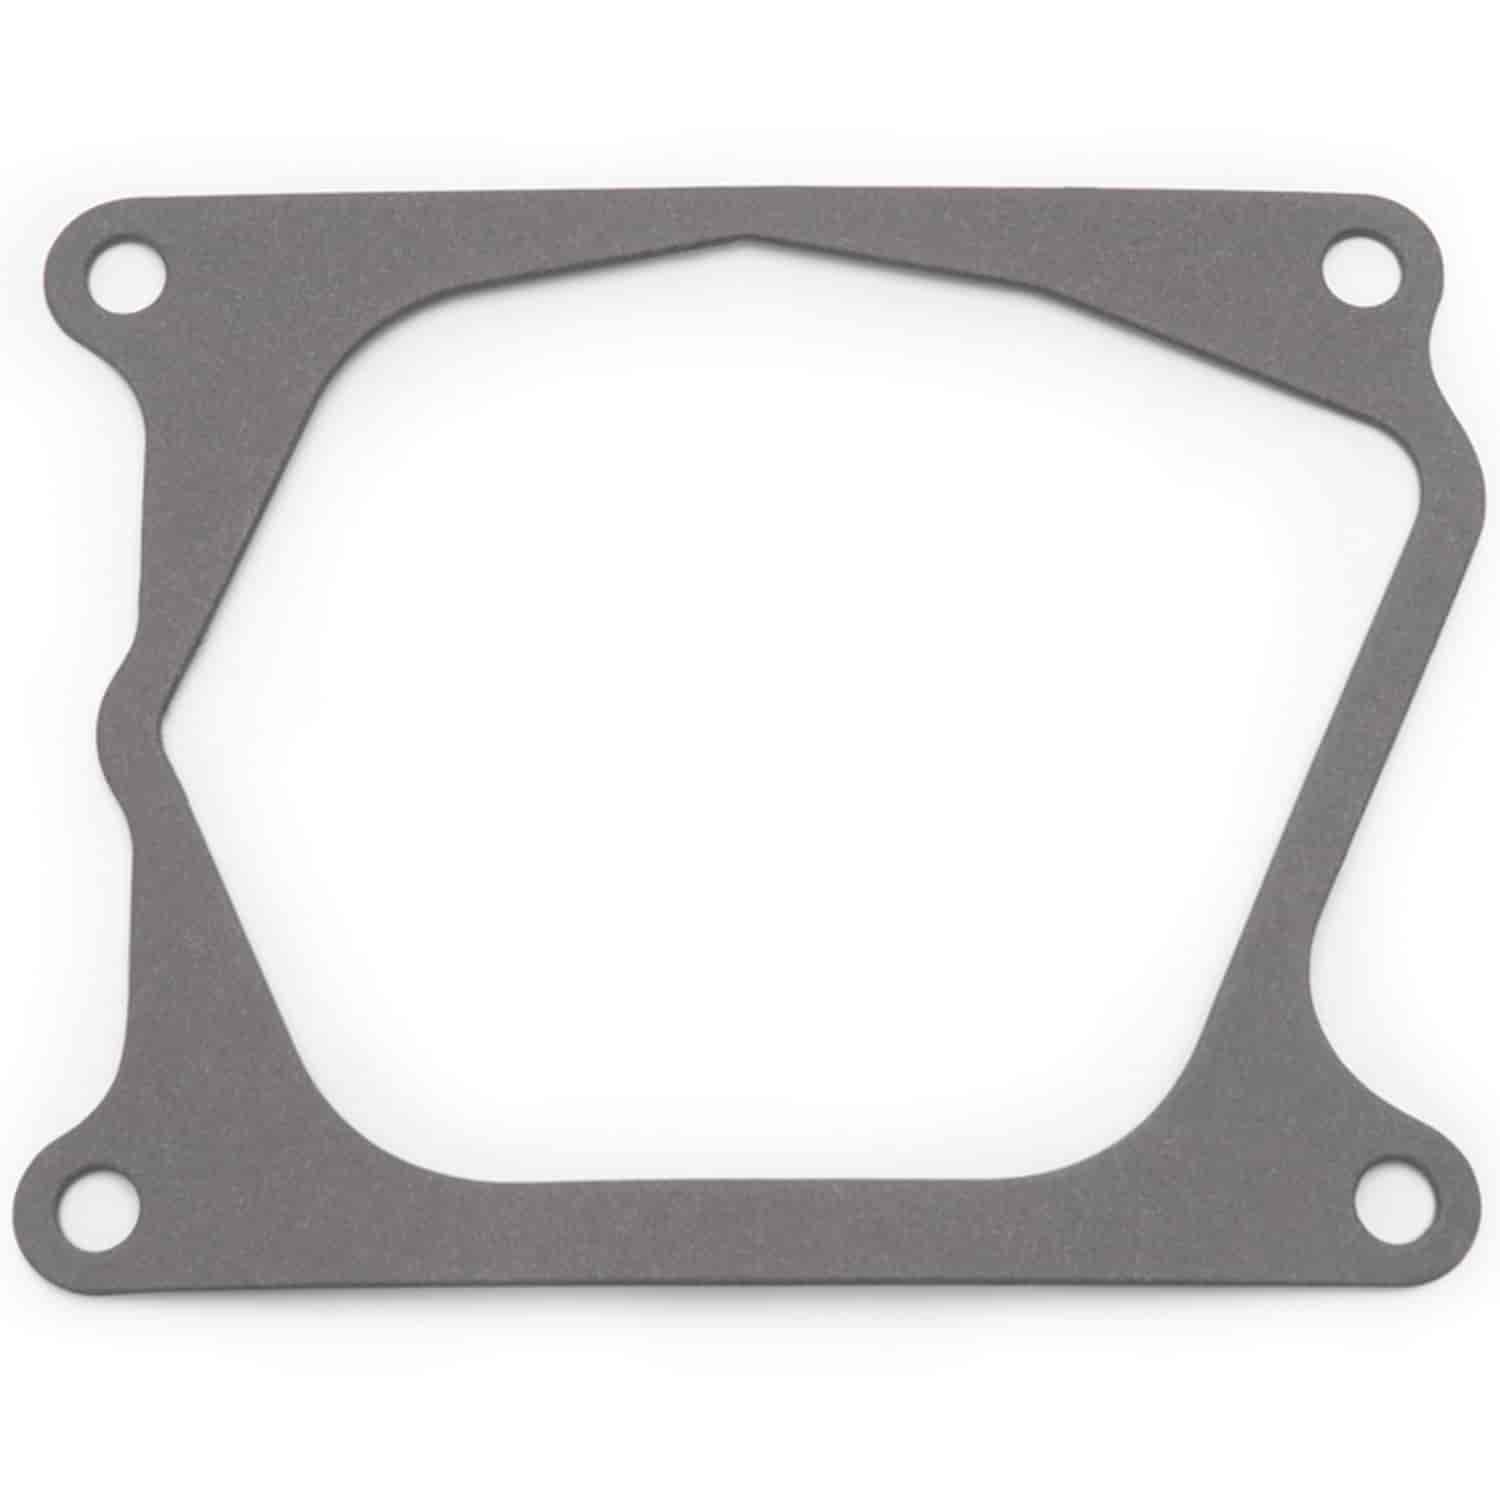 Replacement Pro-Flo 4V Air Valve Gasket